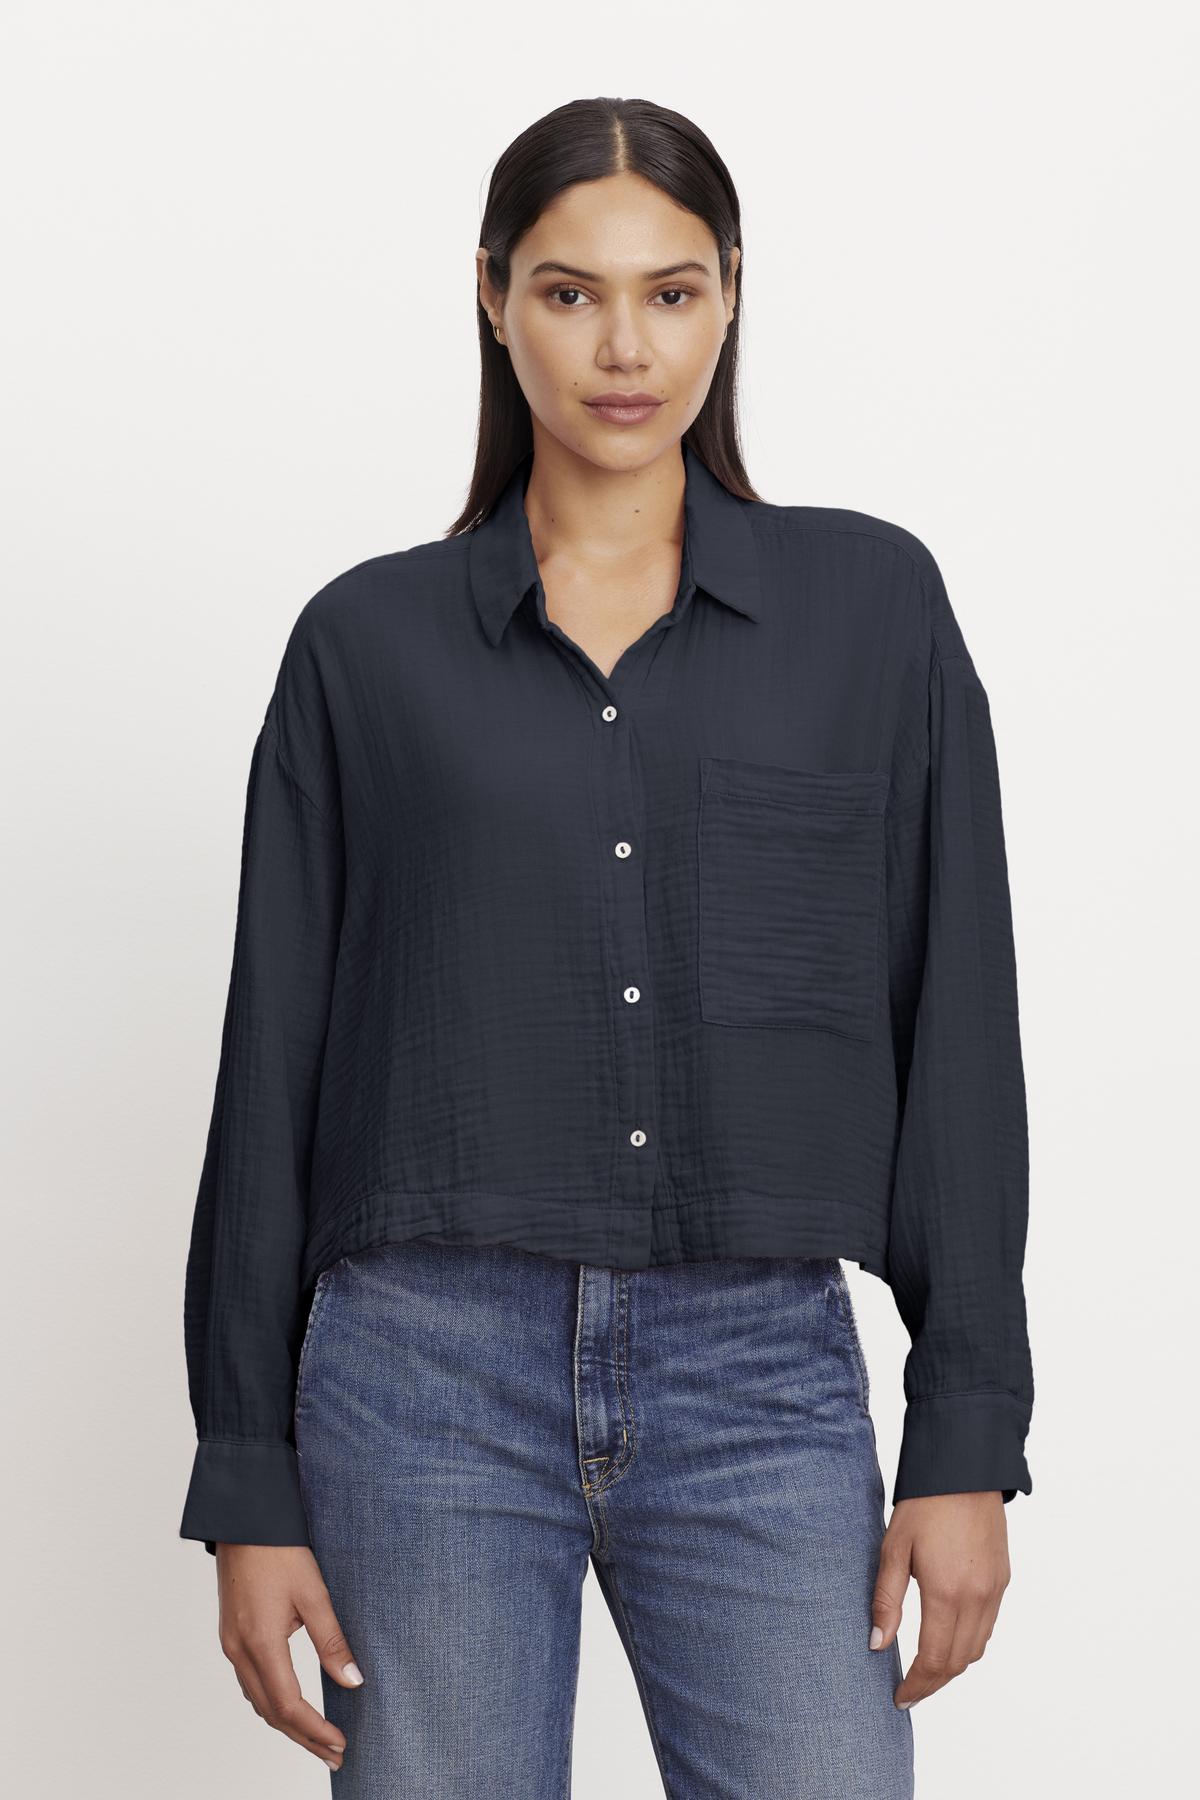   Woman in a casual black LANA COTTON GAUZE BUTTON-UP SHIRT and blue jeans by Velvet by Graham & Spencer. 